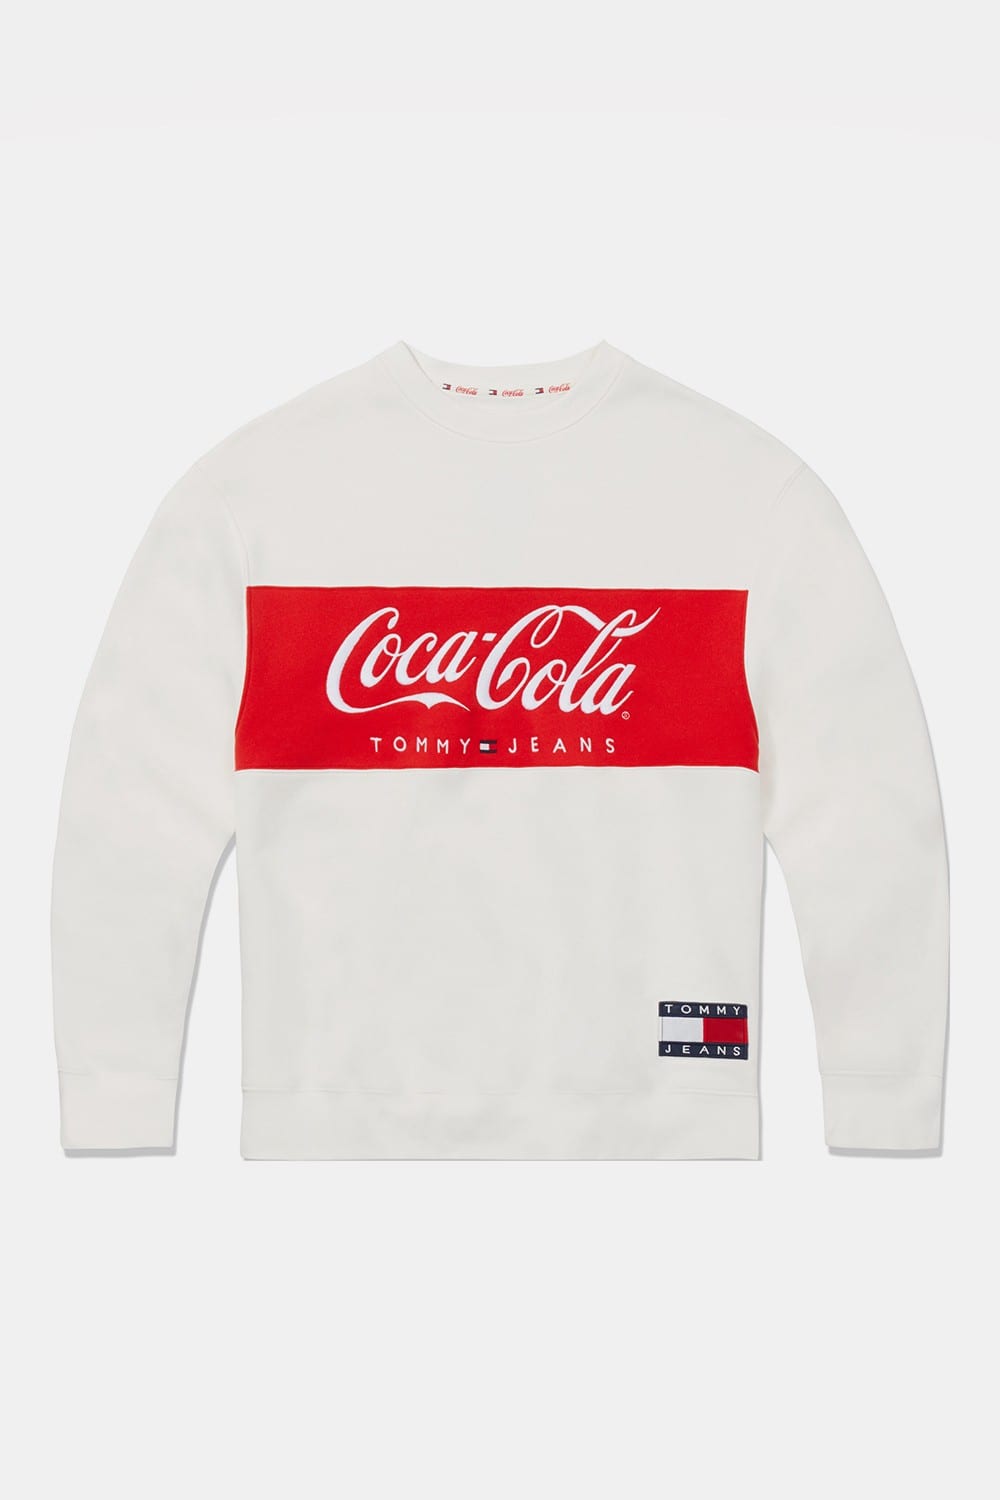 tommy hilfiger and coca cola